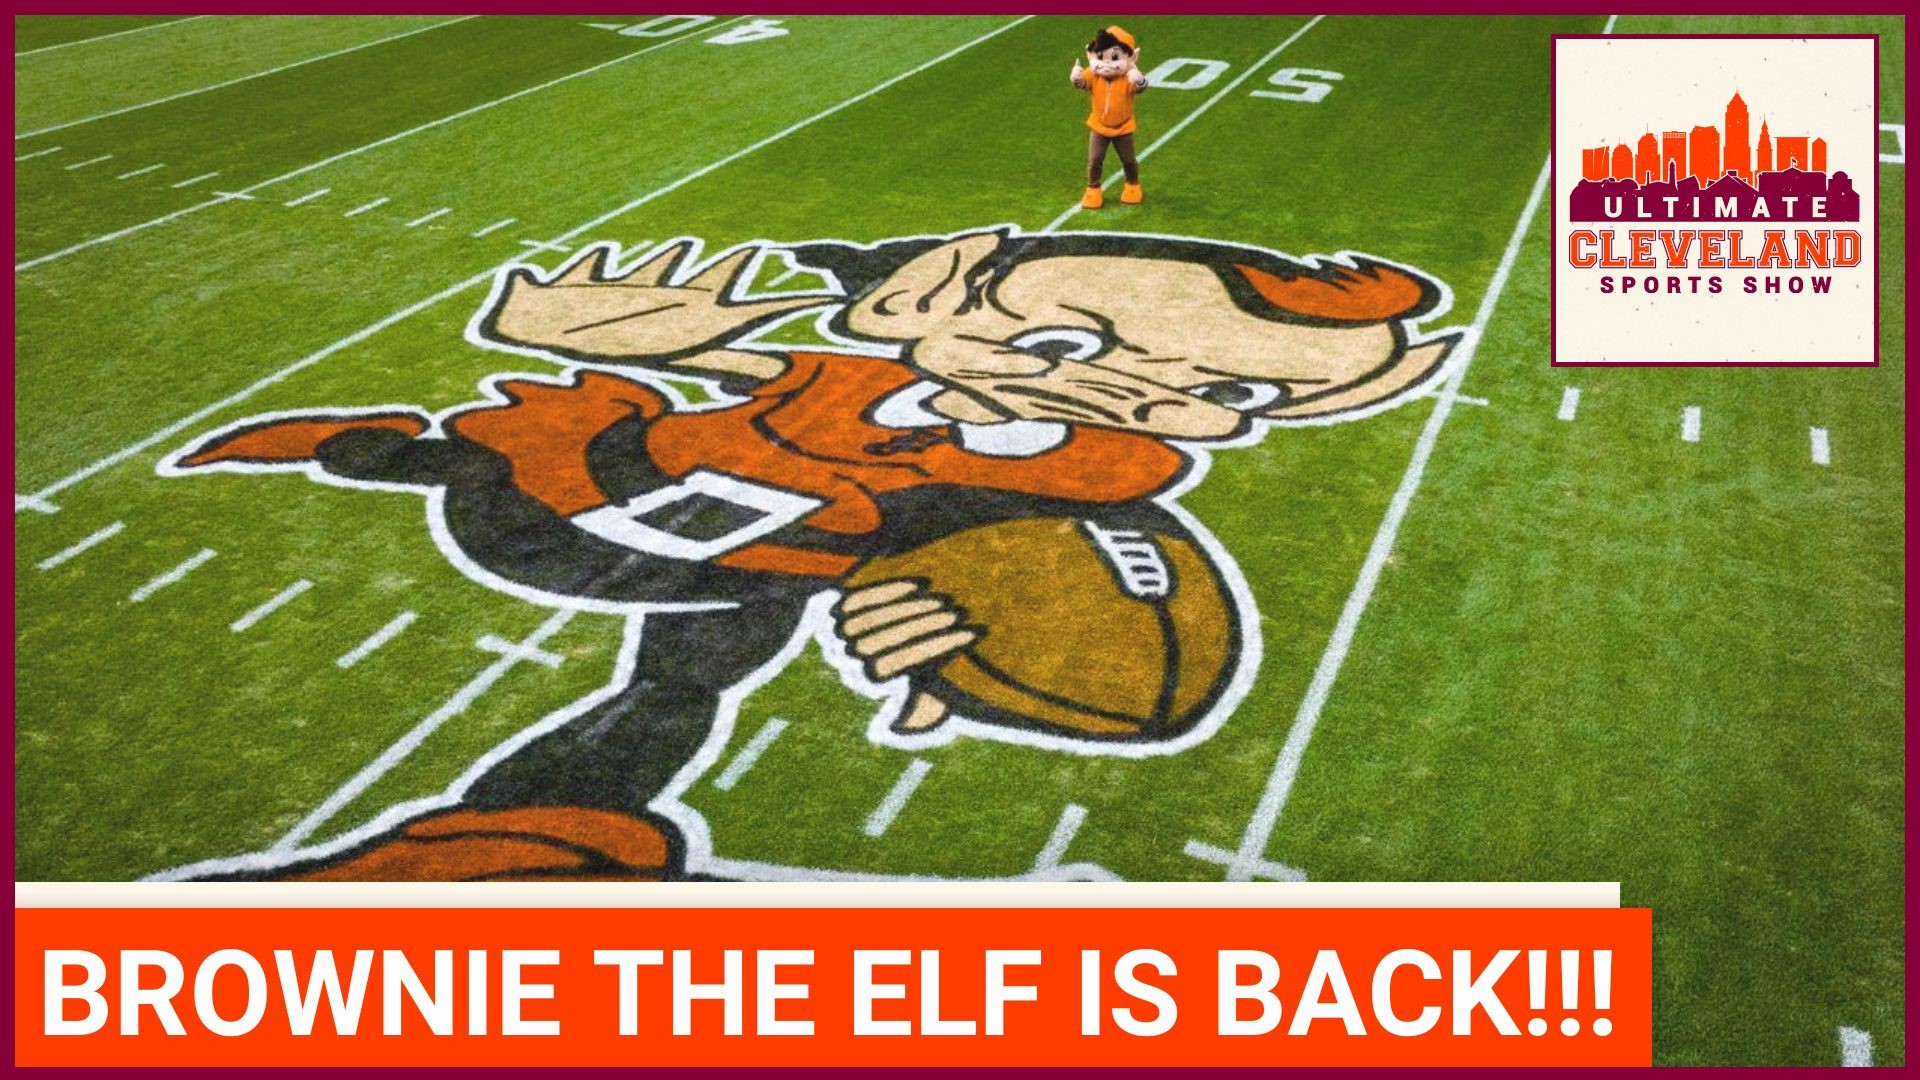 Brownie the Elf gets the Dub over the new Dawg logo